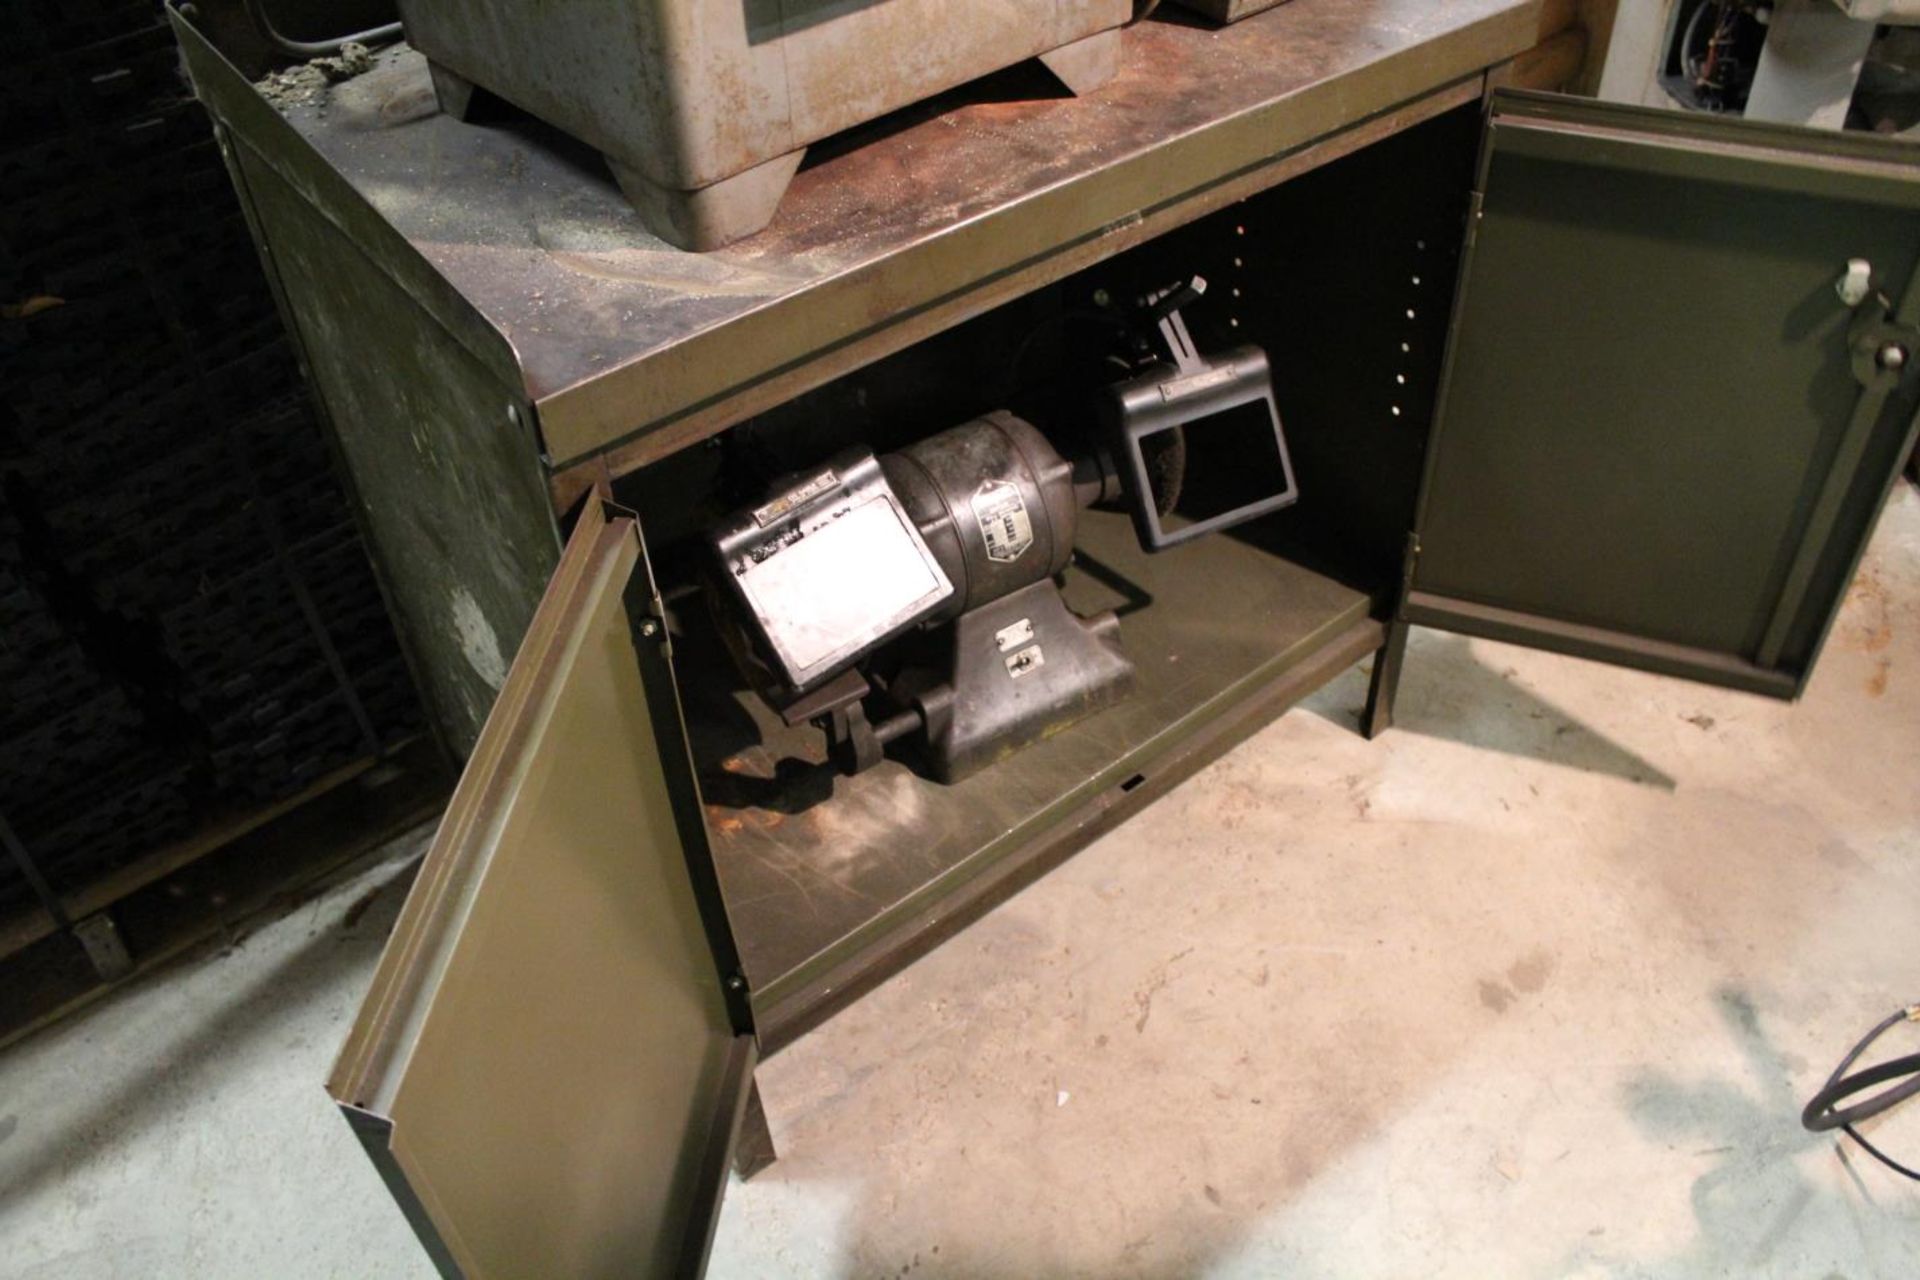 Temco 1620 Heat Treating Furnace With Cabinet, Stanley Grinder - Image 5 of 6